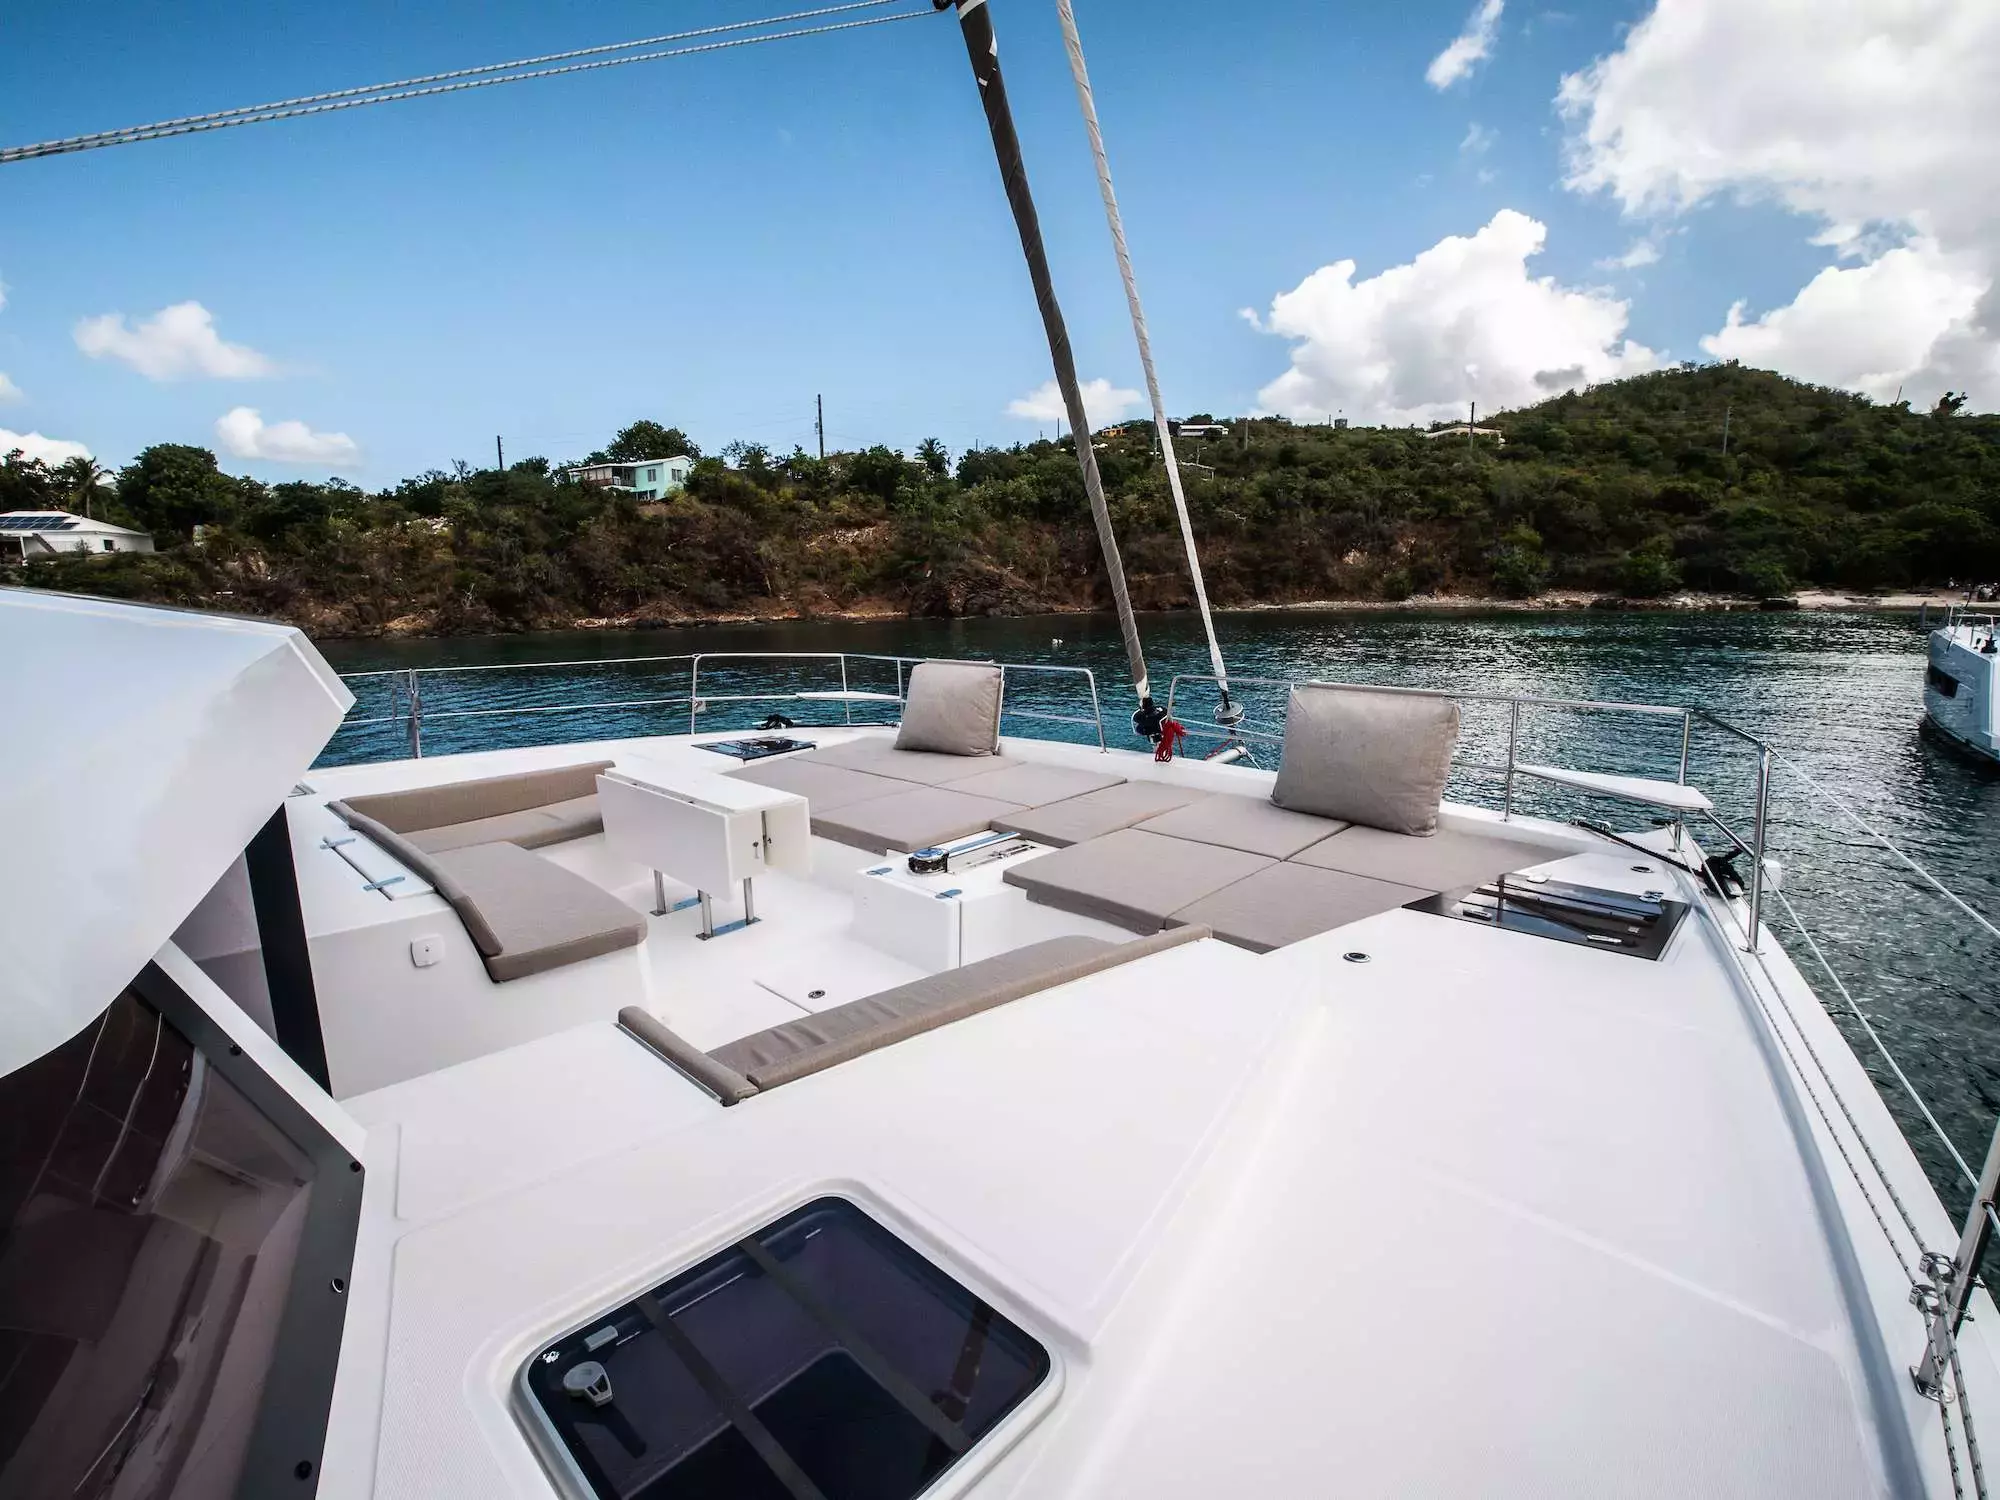 Escapade I by Bali Catamarans - Top rates for a Charter of a private Luxury Catamaran in St Martin